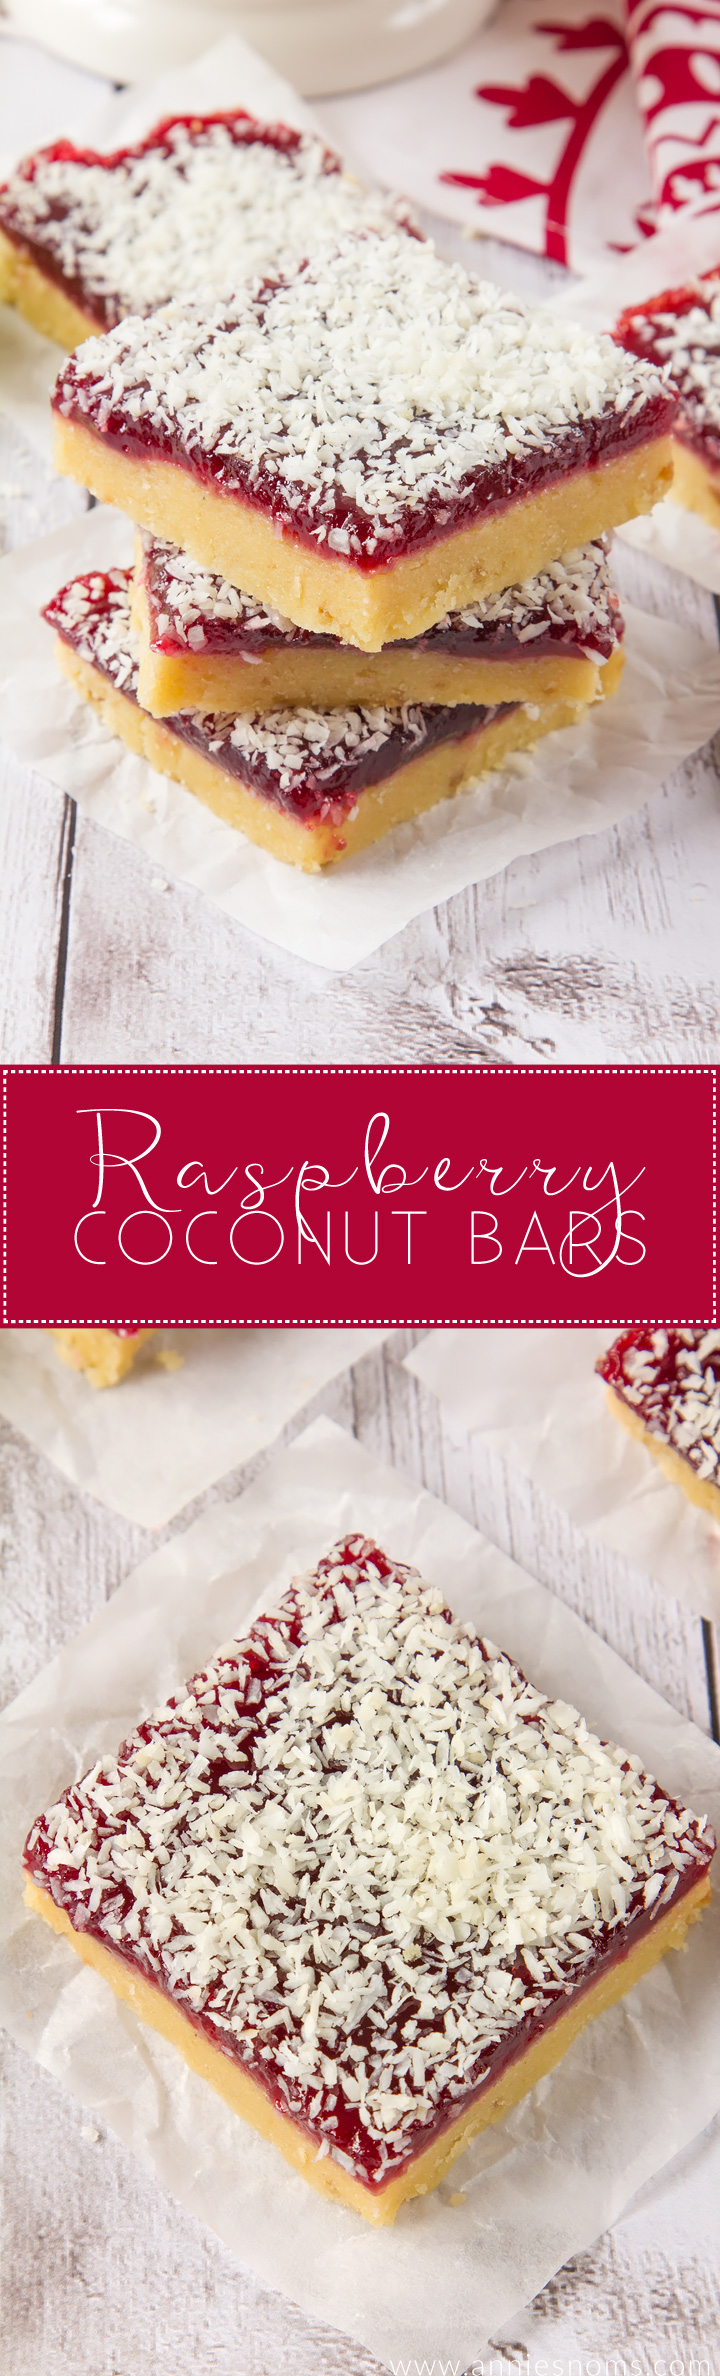 These Raspberry Coconut Bars are super simple to make and with their shortbread base, raspberry jam middle and dessicated coconut topping, they are a combination of sweet, crunchy and tart in one portable dessert!